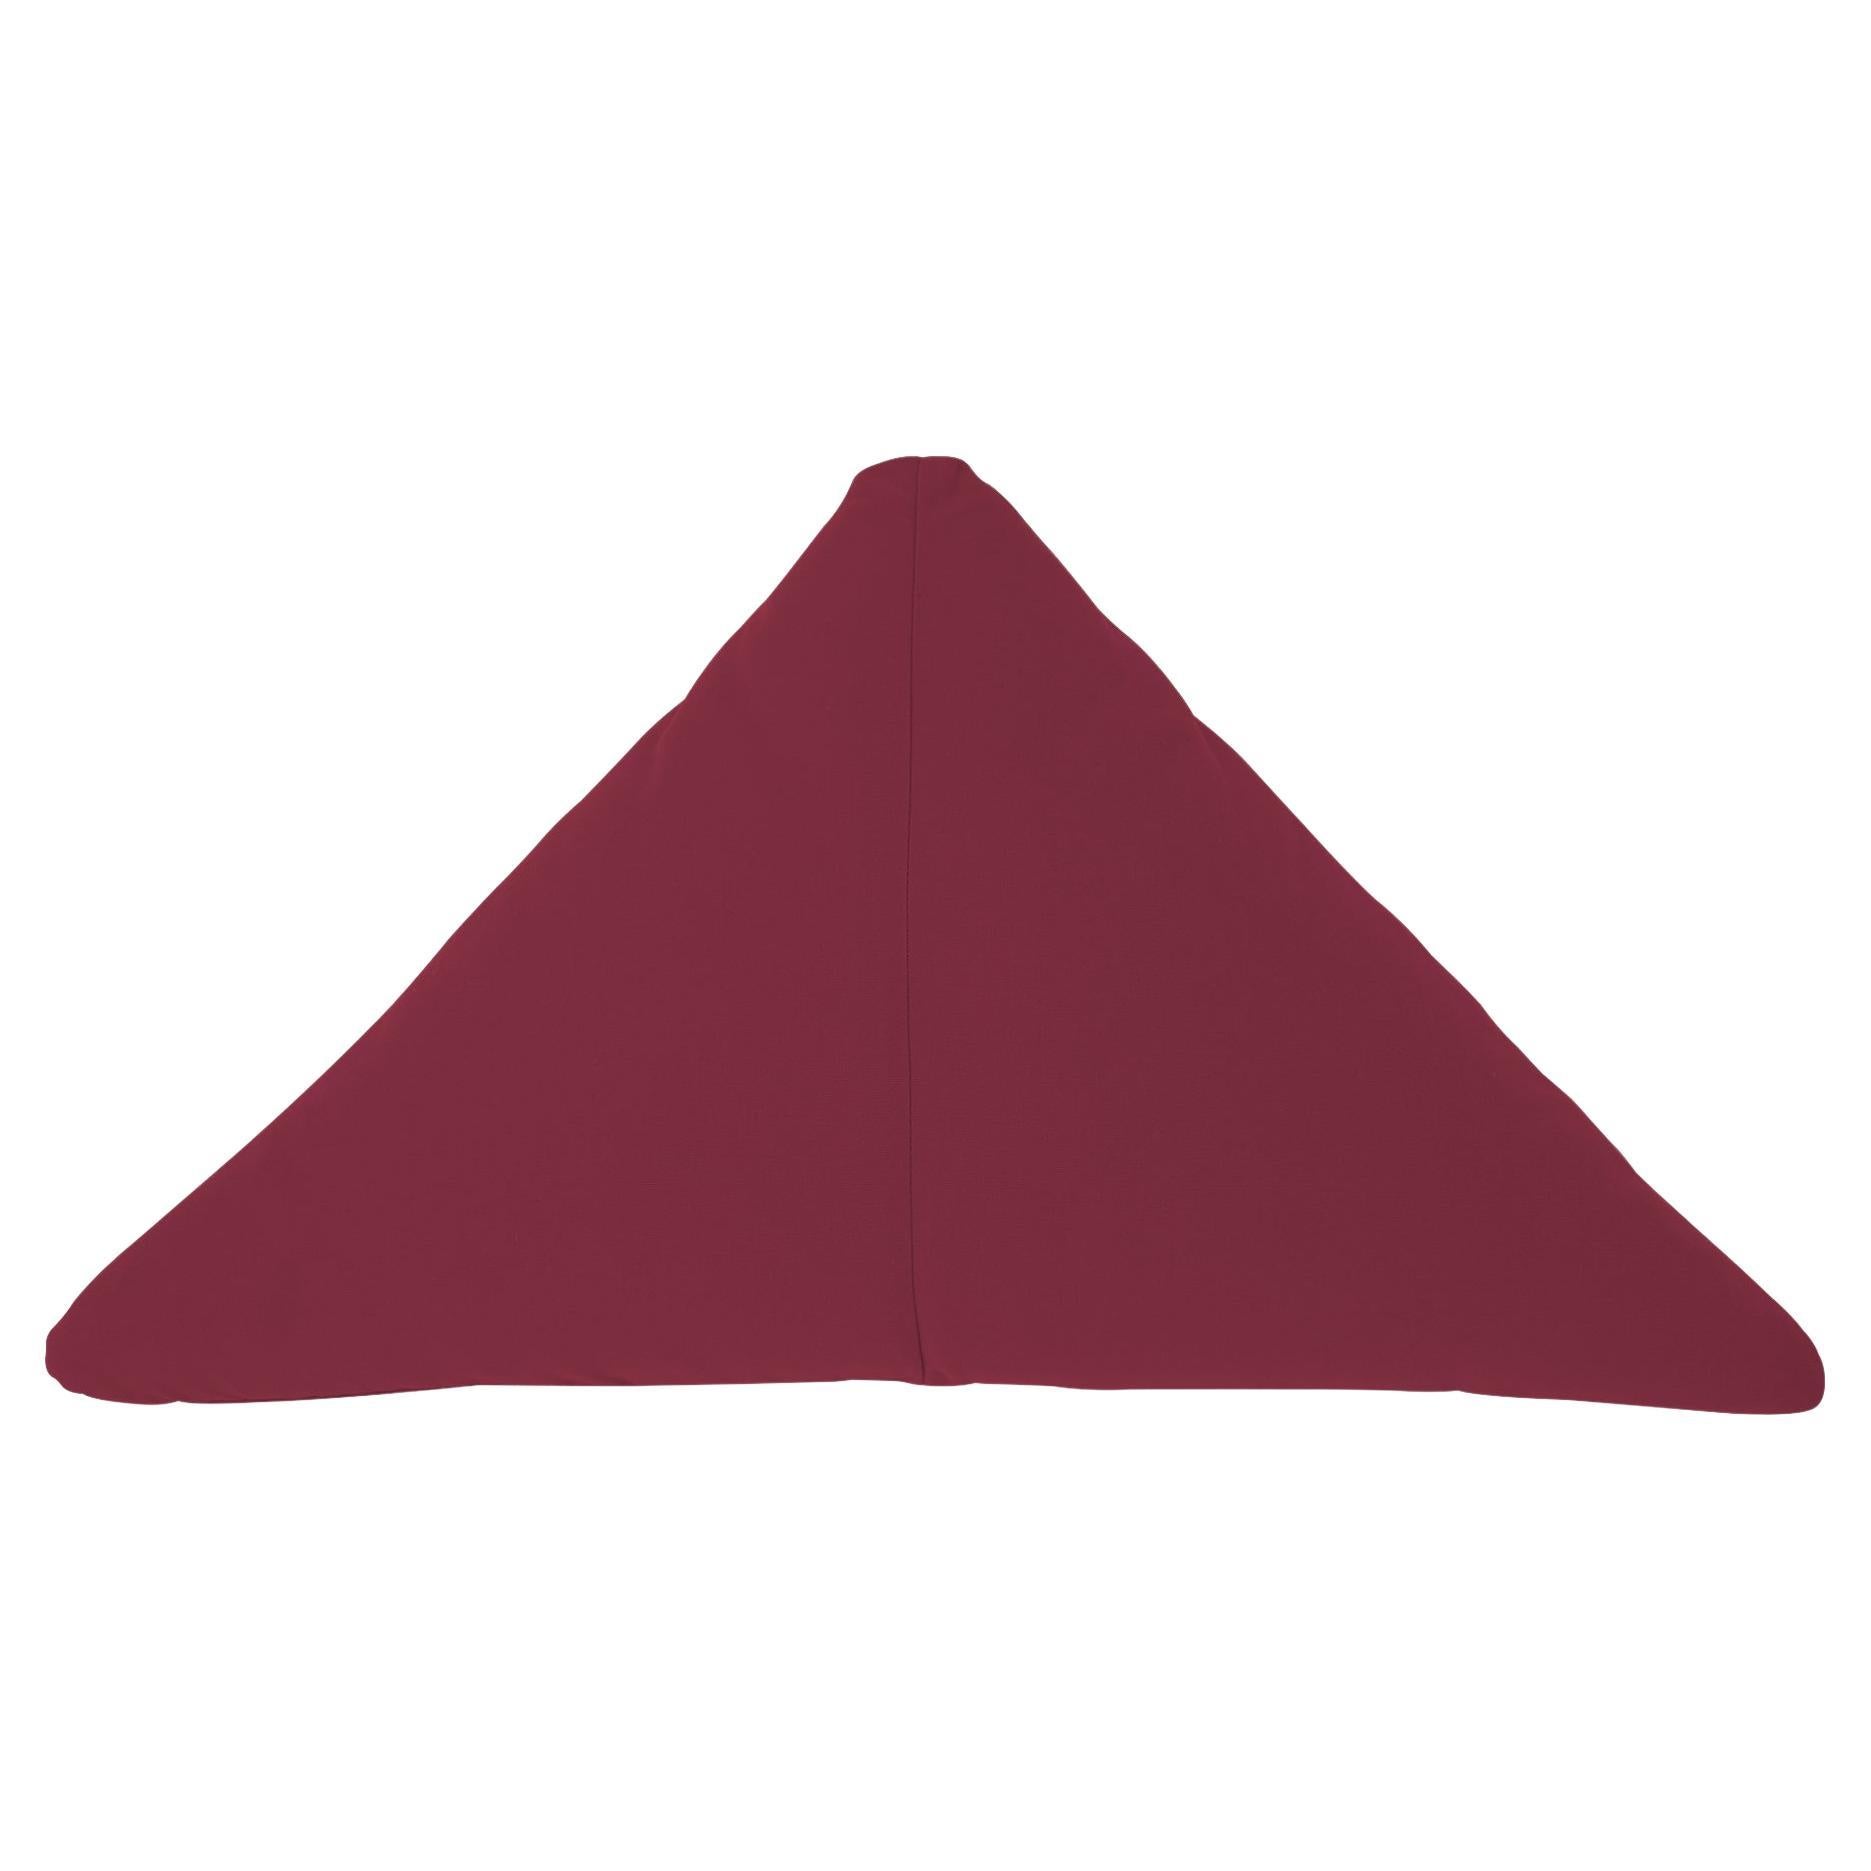 Bend Goods - Triangle Throw Pillow in Burgundy Sunbrella For Sale